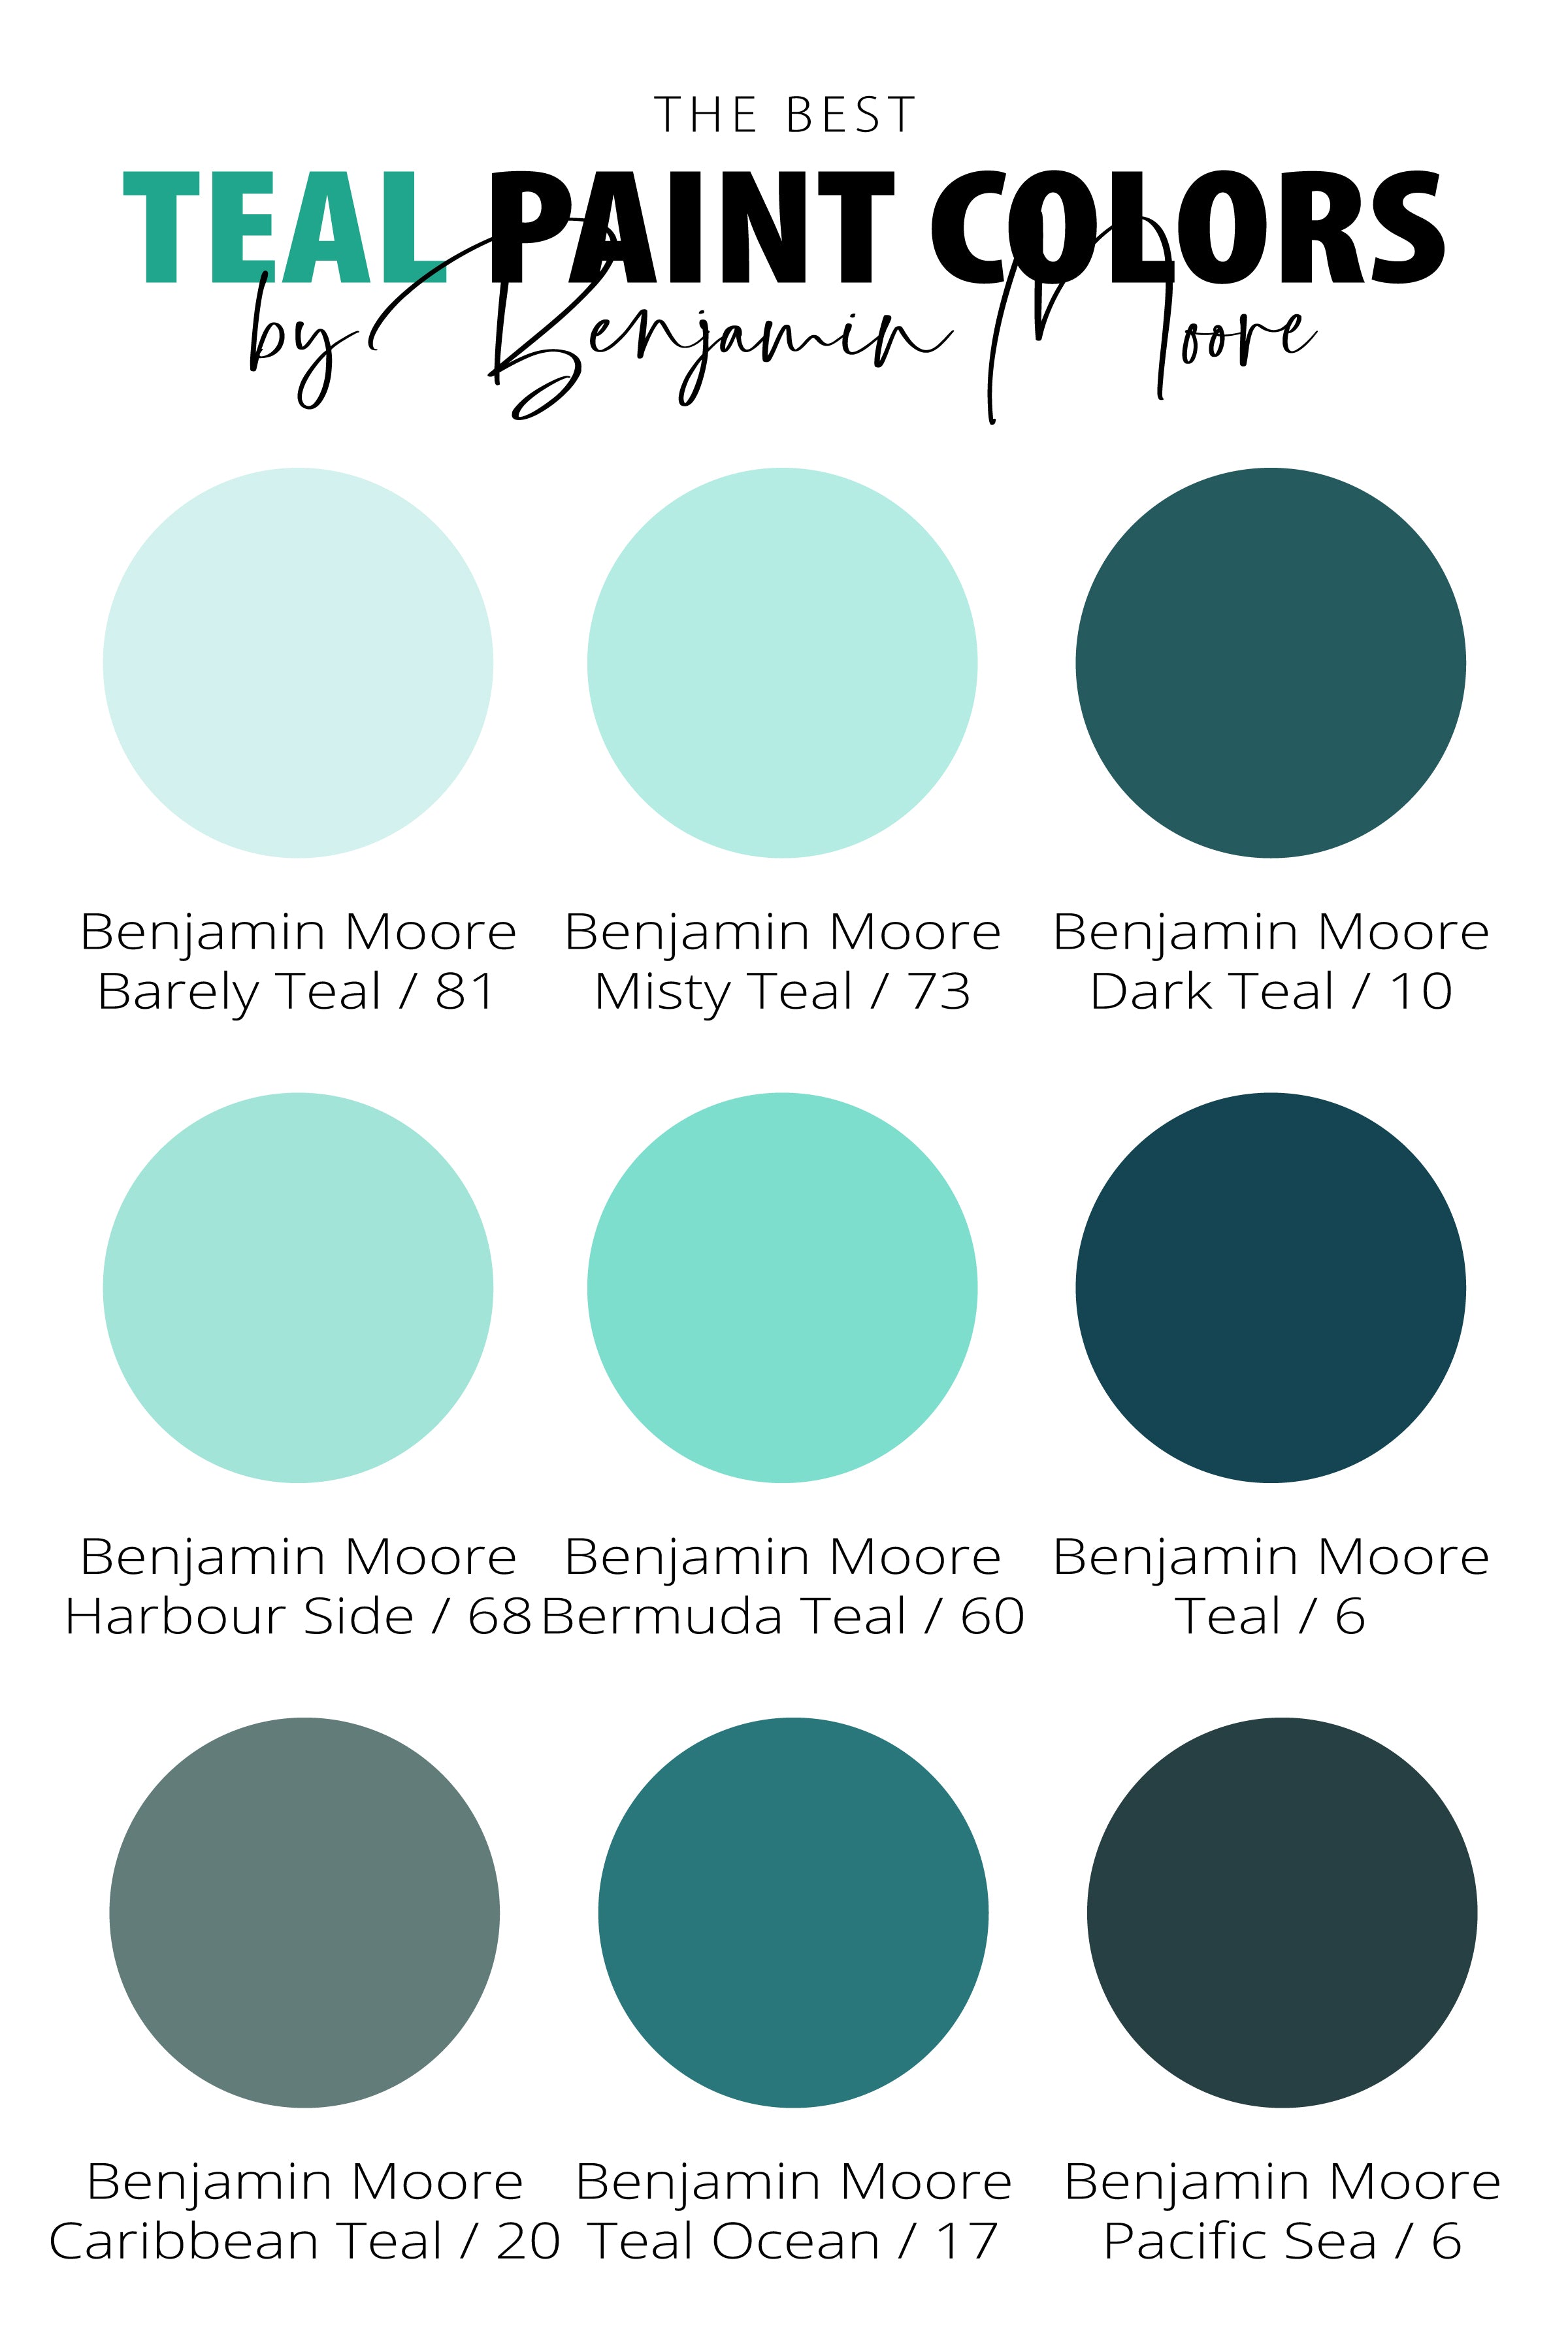 15 Best Teal Paint Colors: From Light to Dark Teal